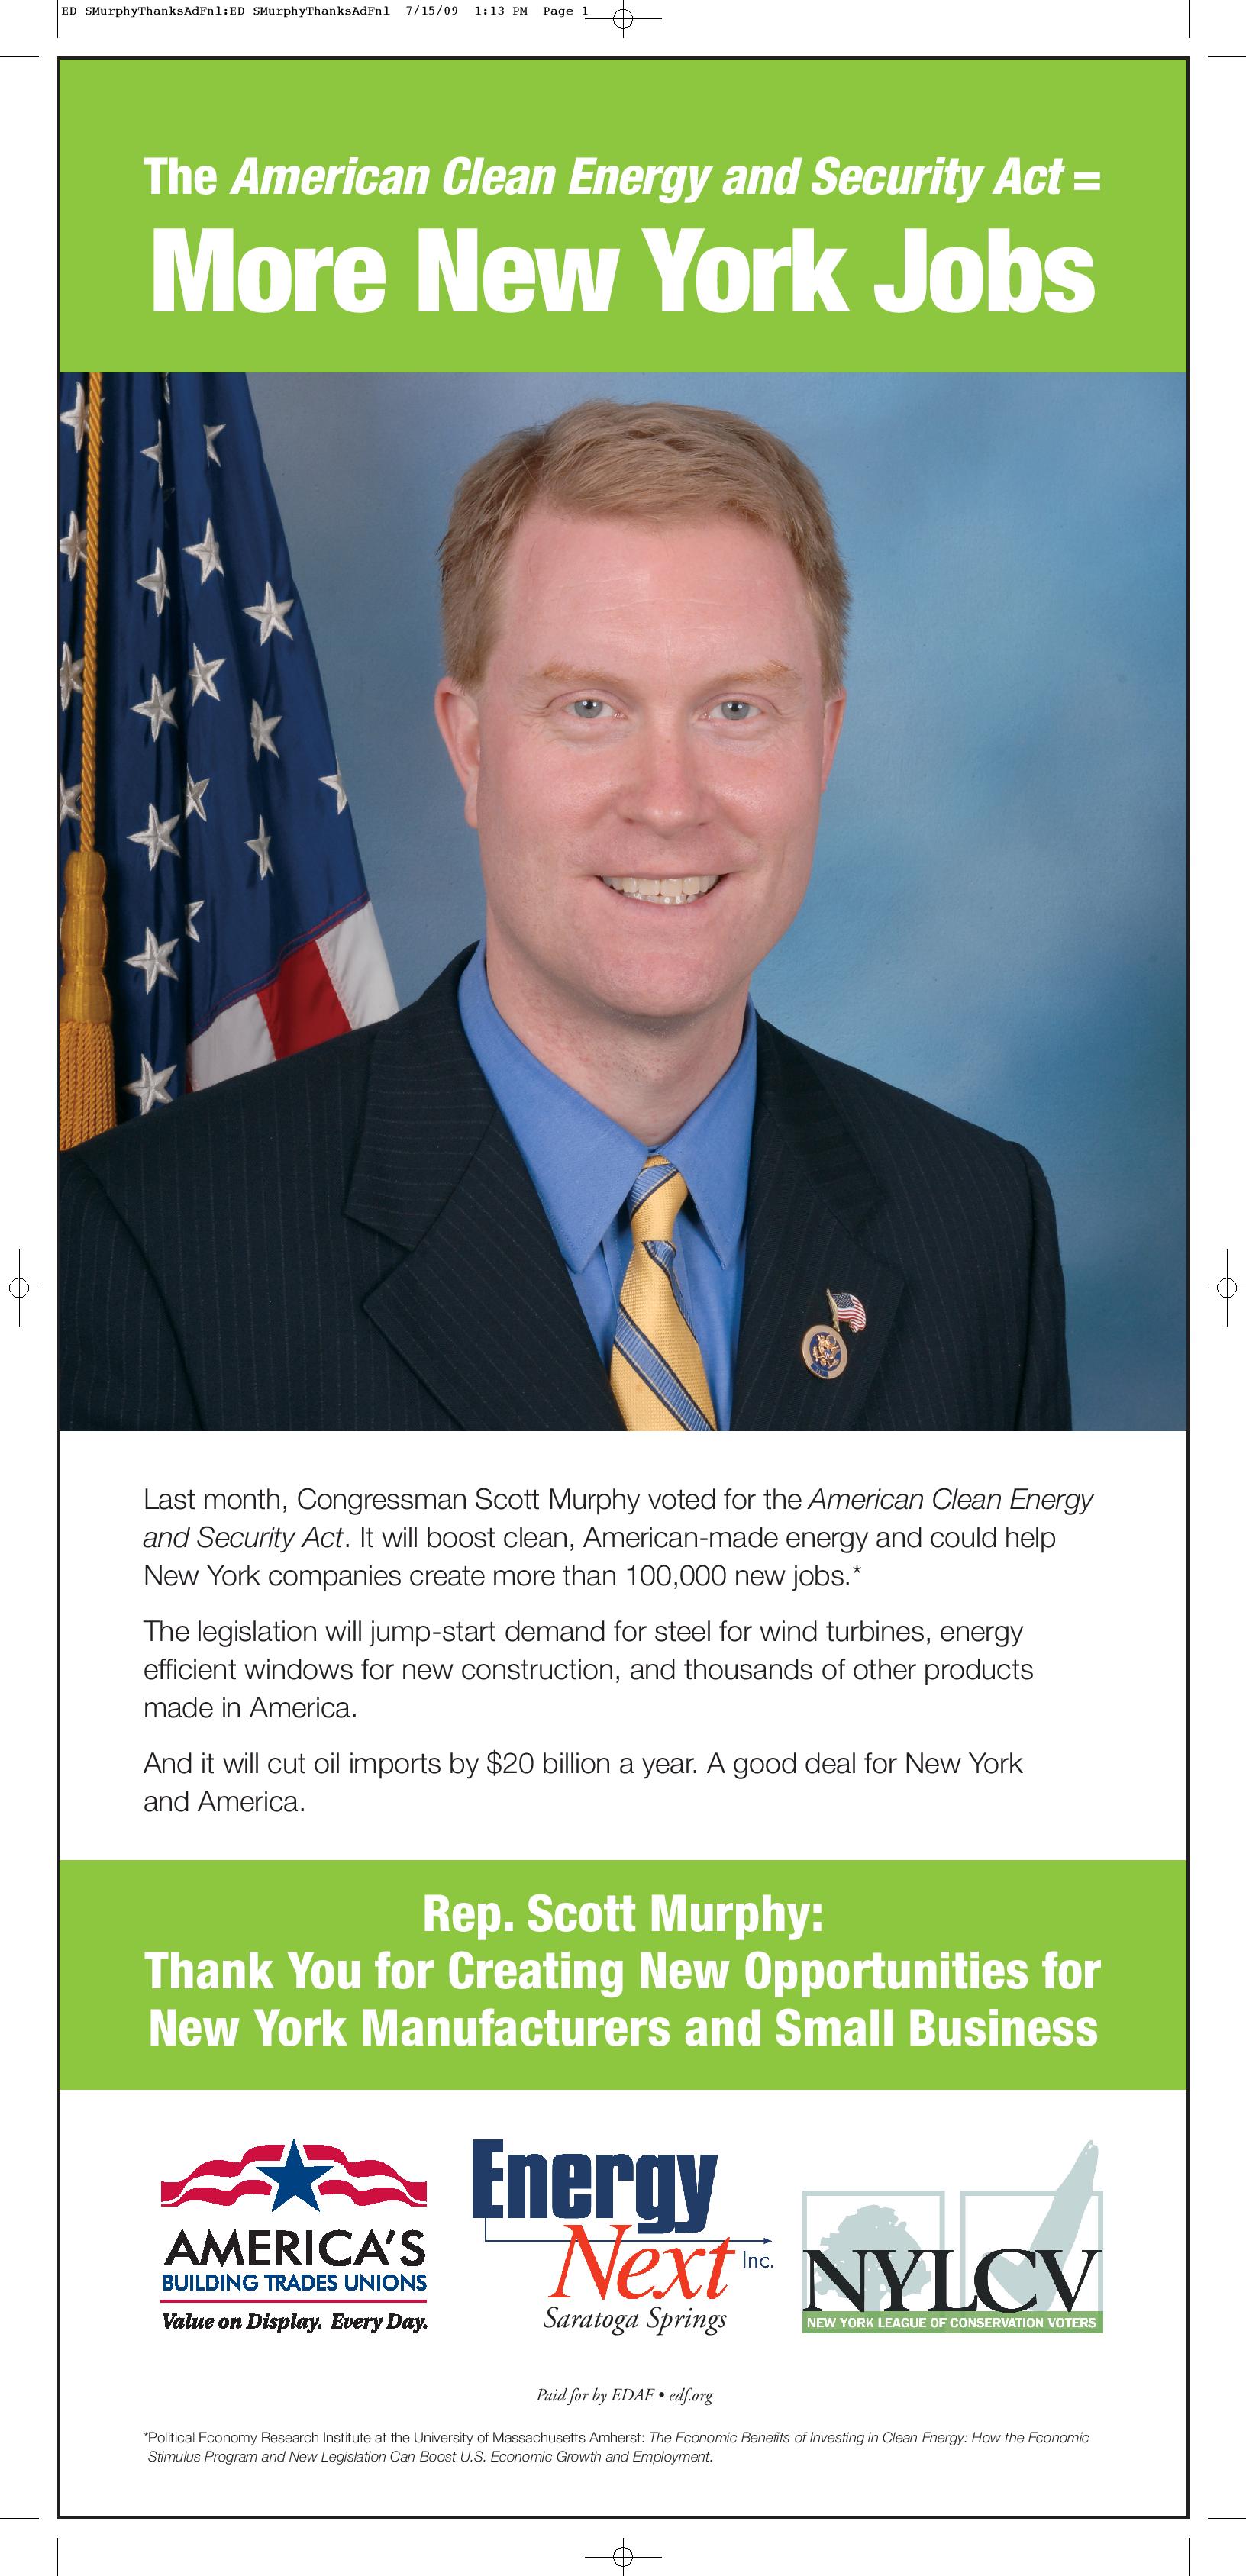 Thank You for Supporting the American Clean Energy and Security Act: Rep. Scott Murphy